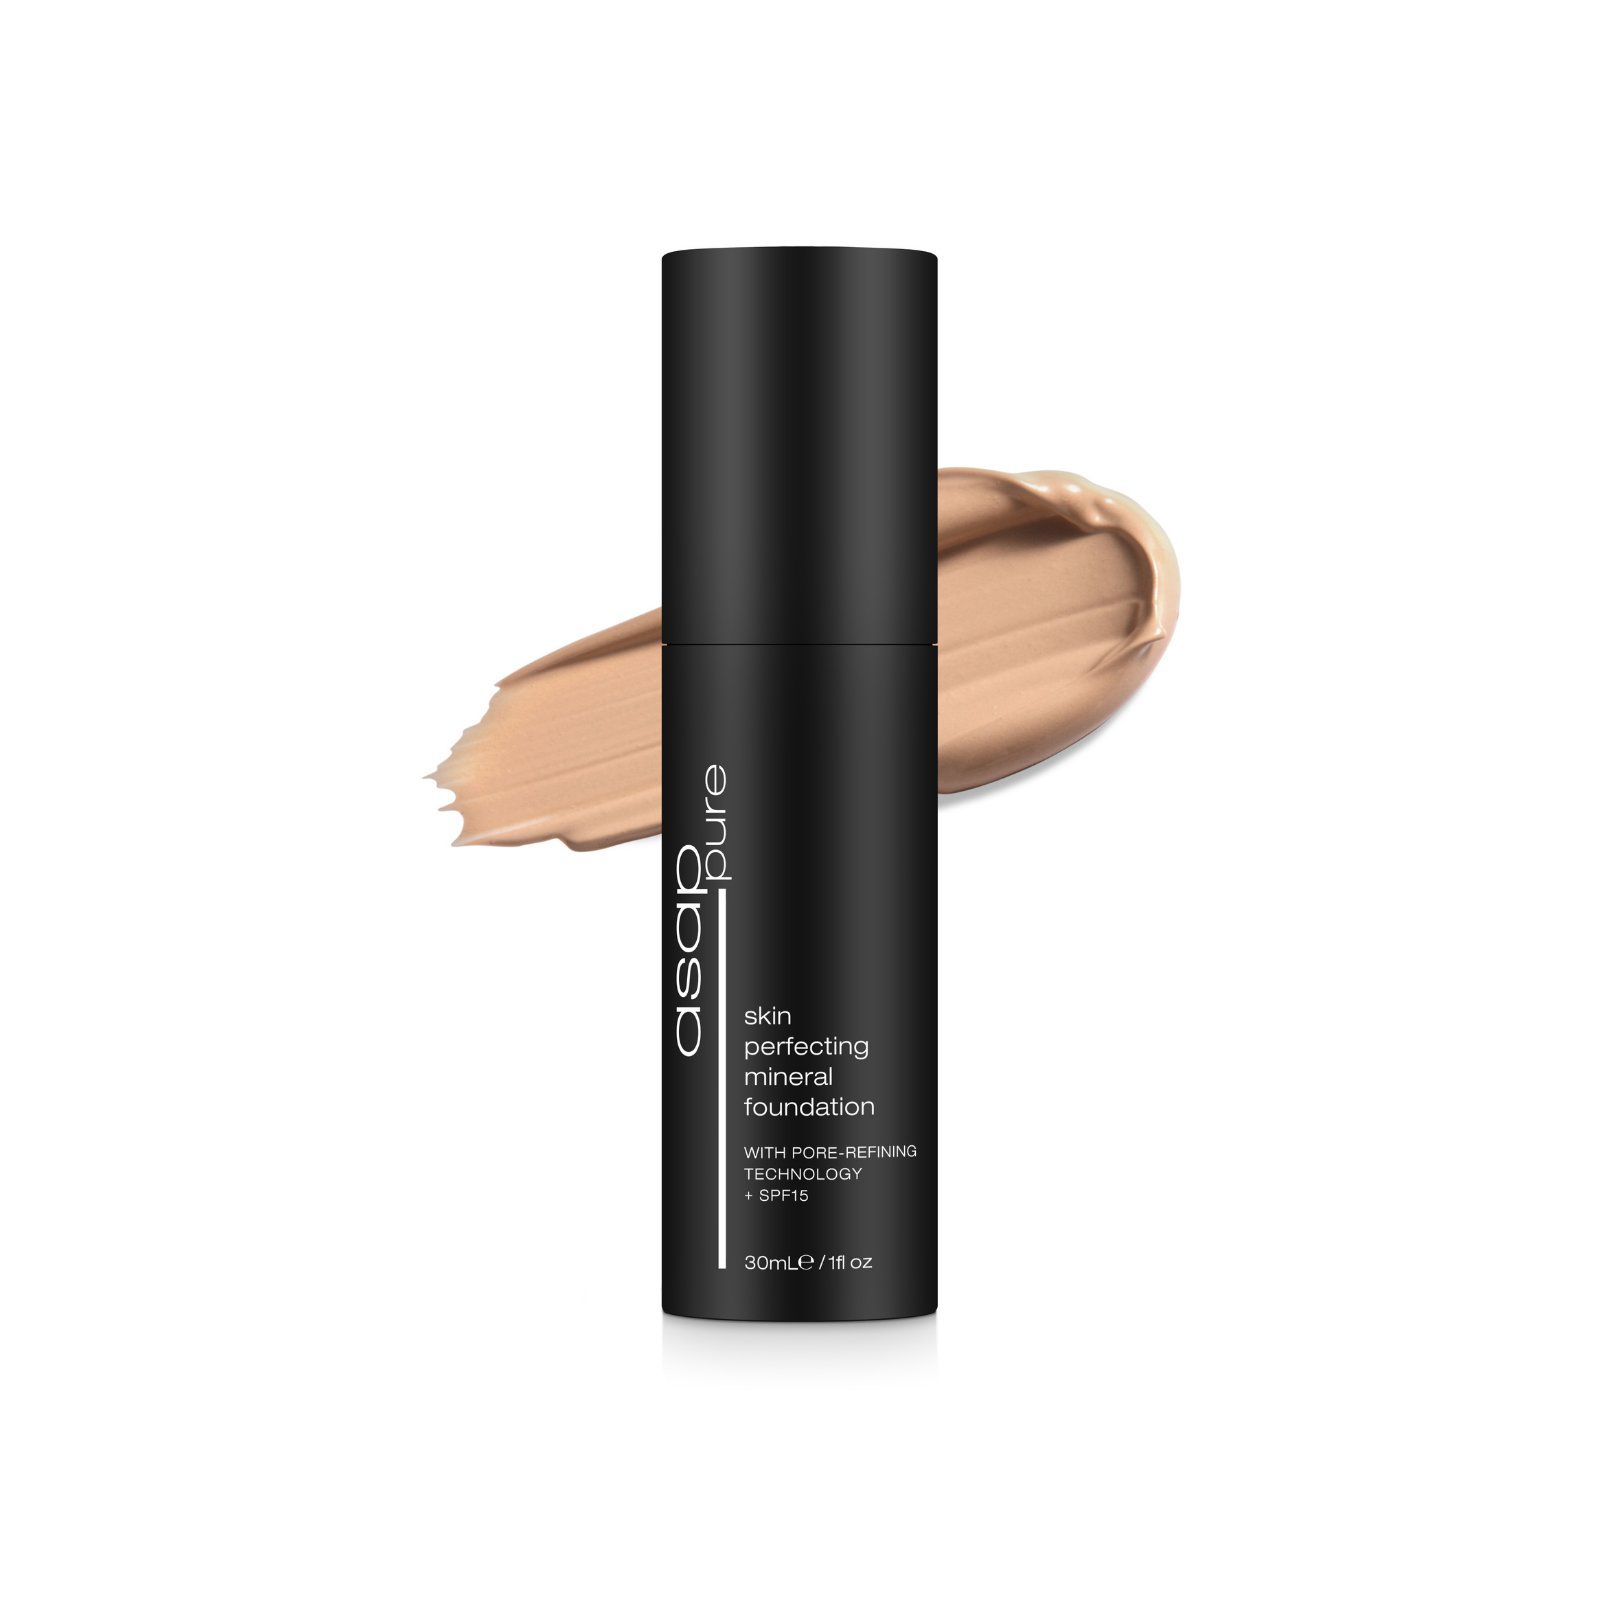 ASAP Skin Perfecting Mineral Foundation with Pore-Refining Technology + SPF15 - Pure Three 30ml